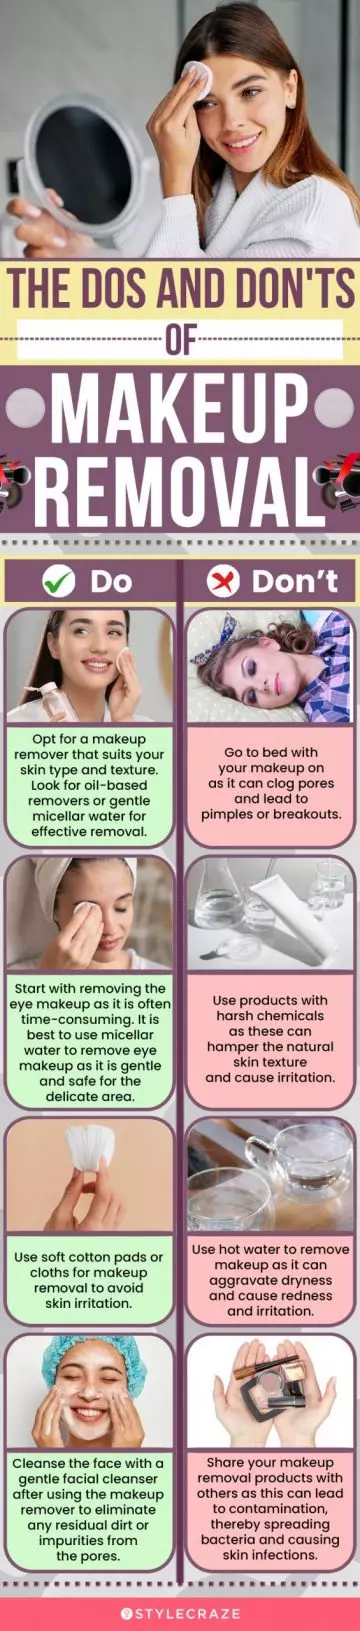 The Dos and Don'ts Of Makeup Removal (infographic)